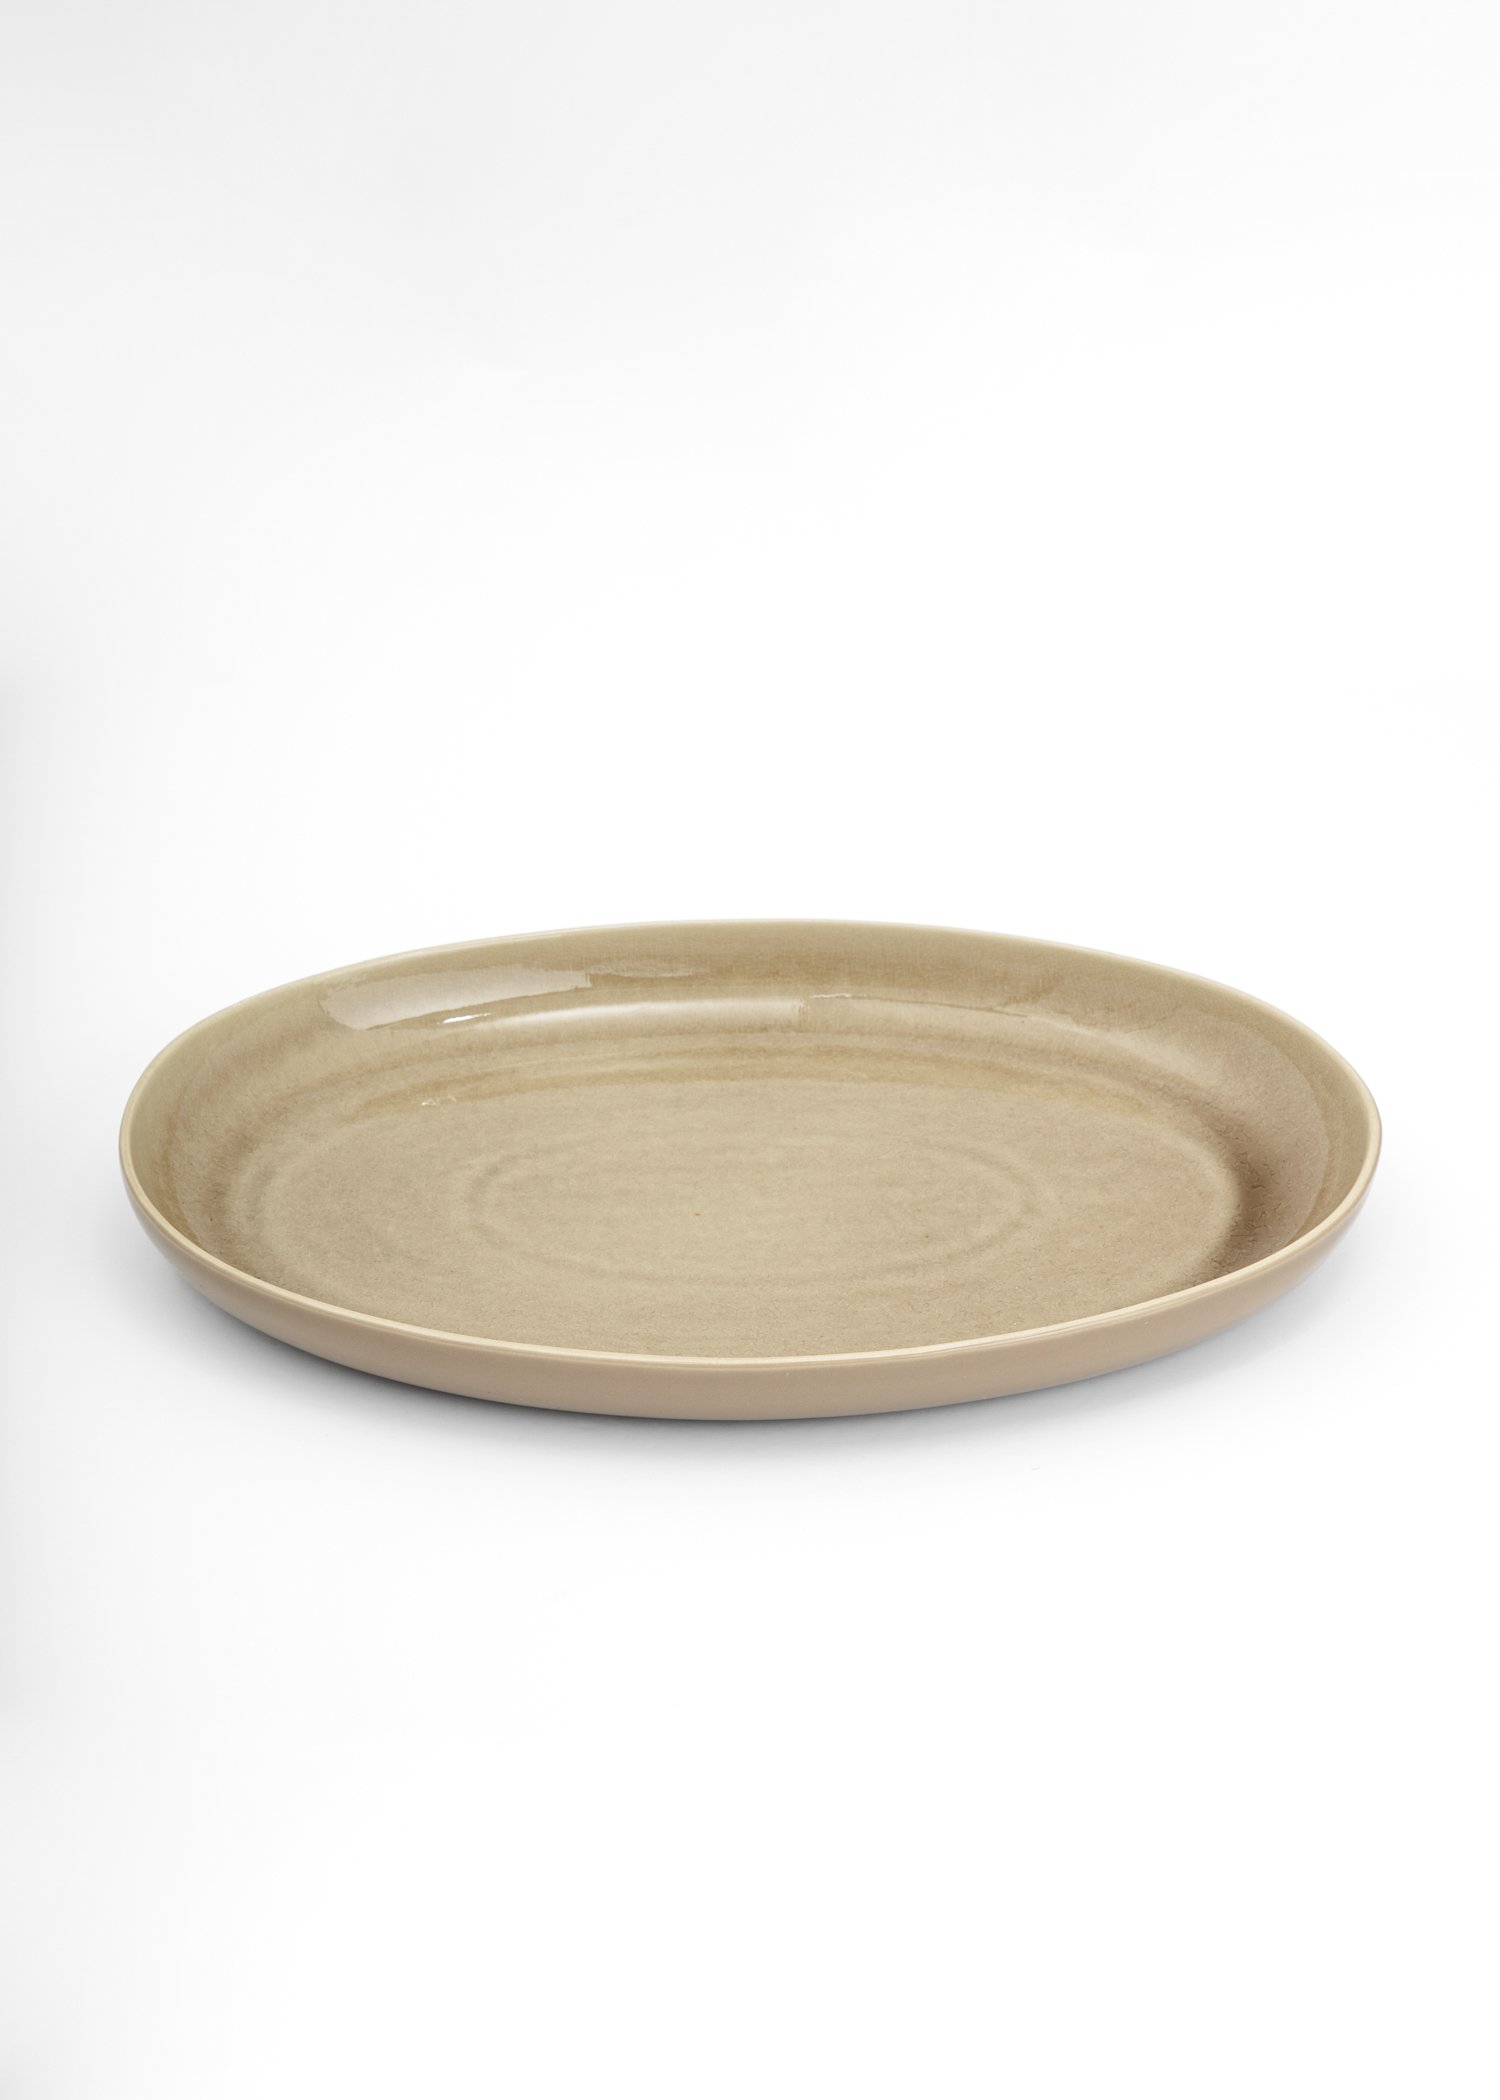 Stoneware serving plate